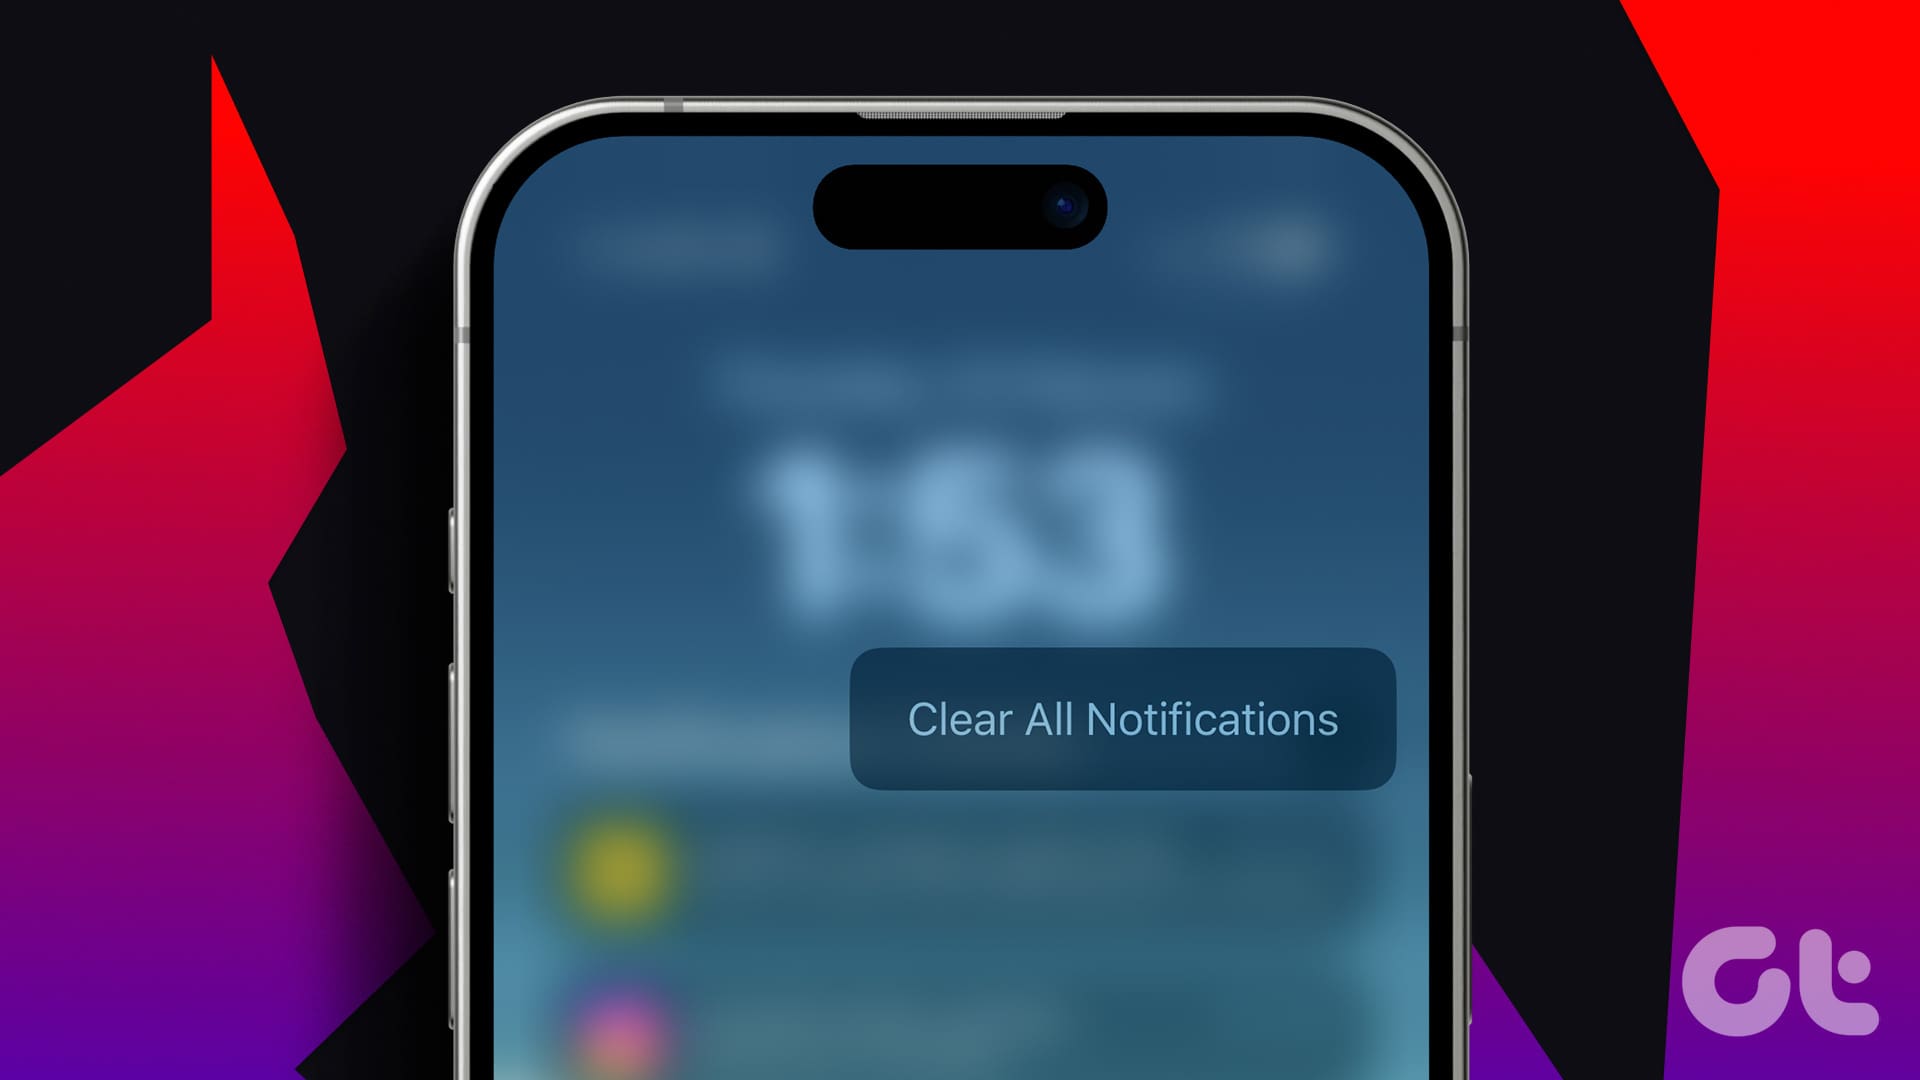 How to Clear All Notifications on iPhone